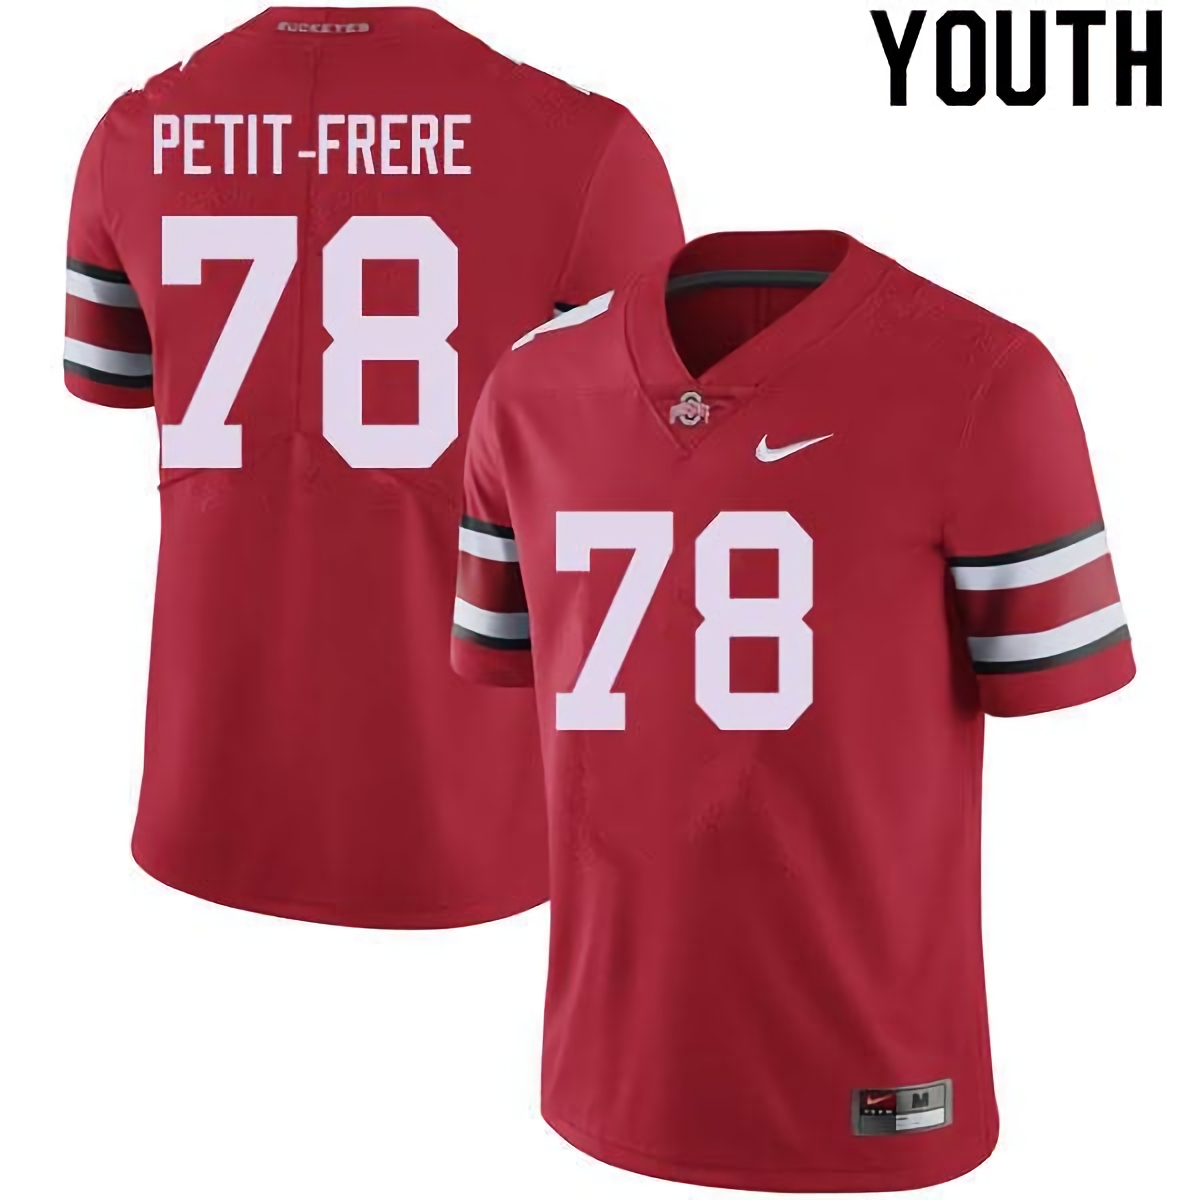 Nicholas Petit-Frere Ohio State Buckeyes Youth NCAA #78 Nike Red College Stitched Football Jersey DIY6756UK